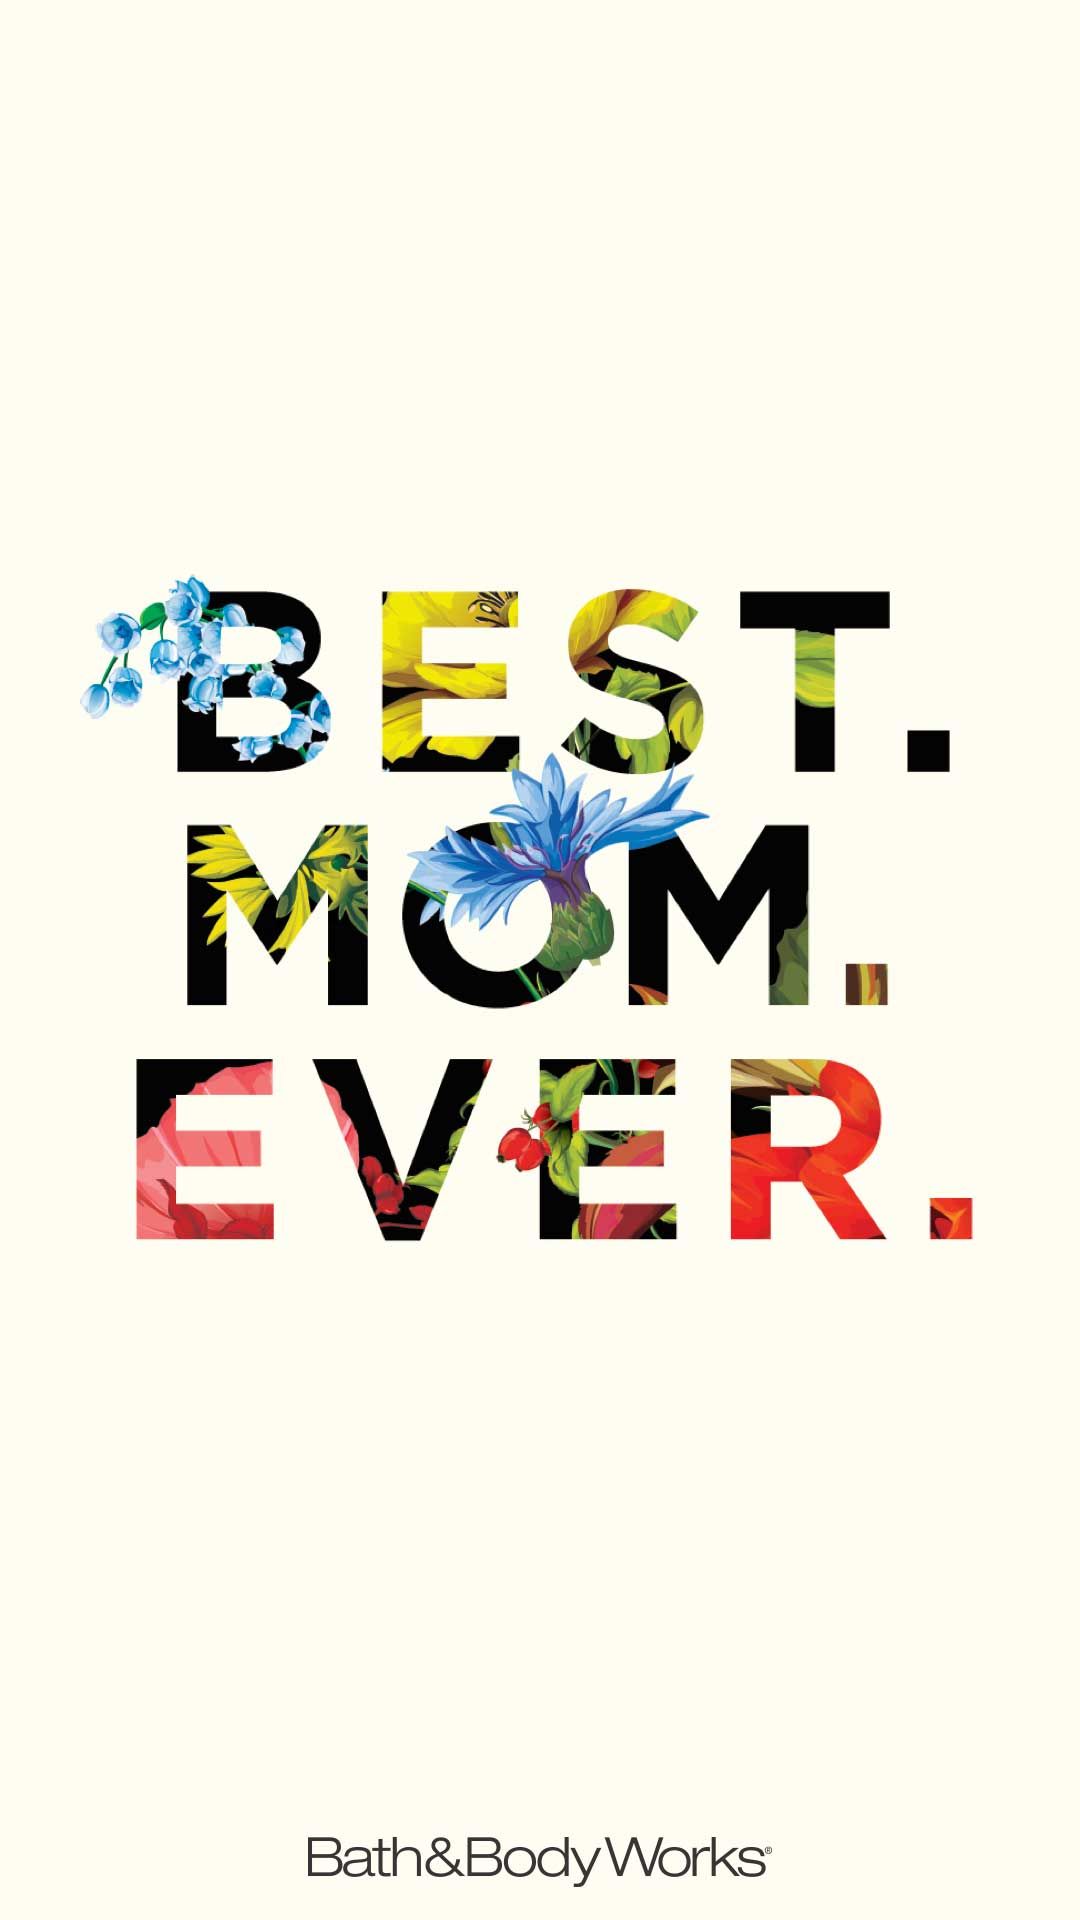 Mom Wallpapers